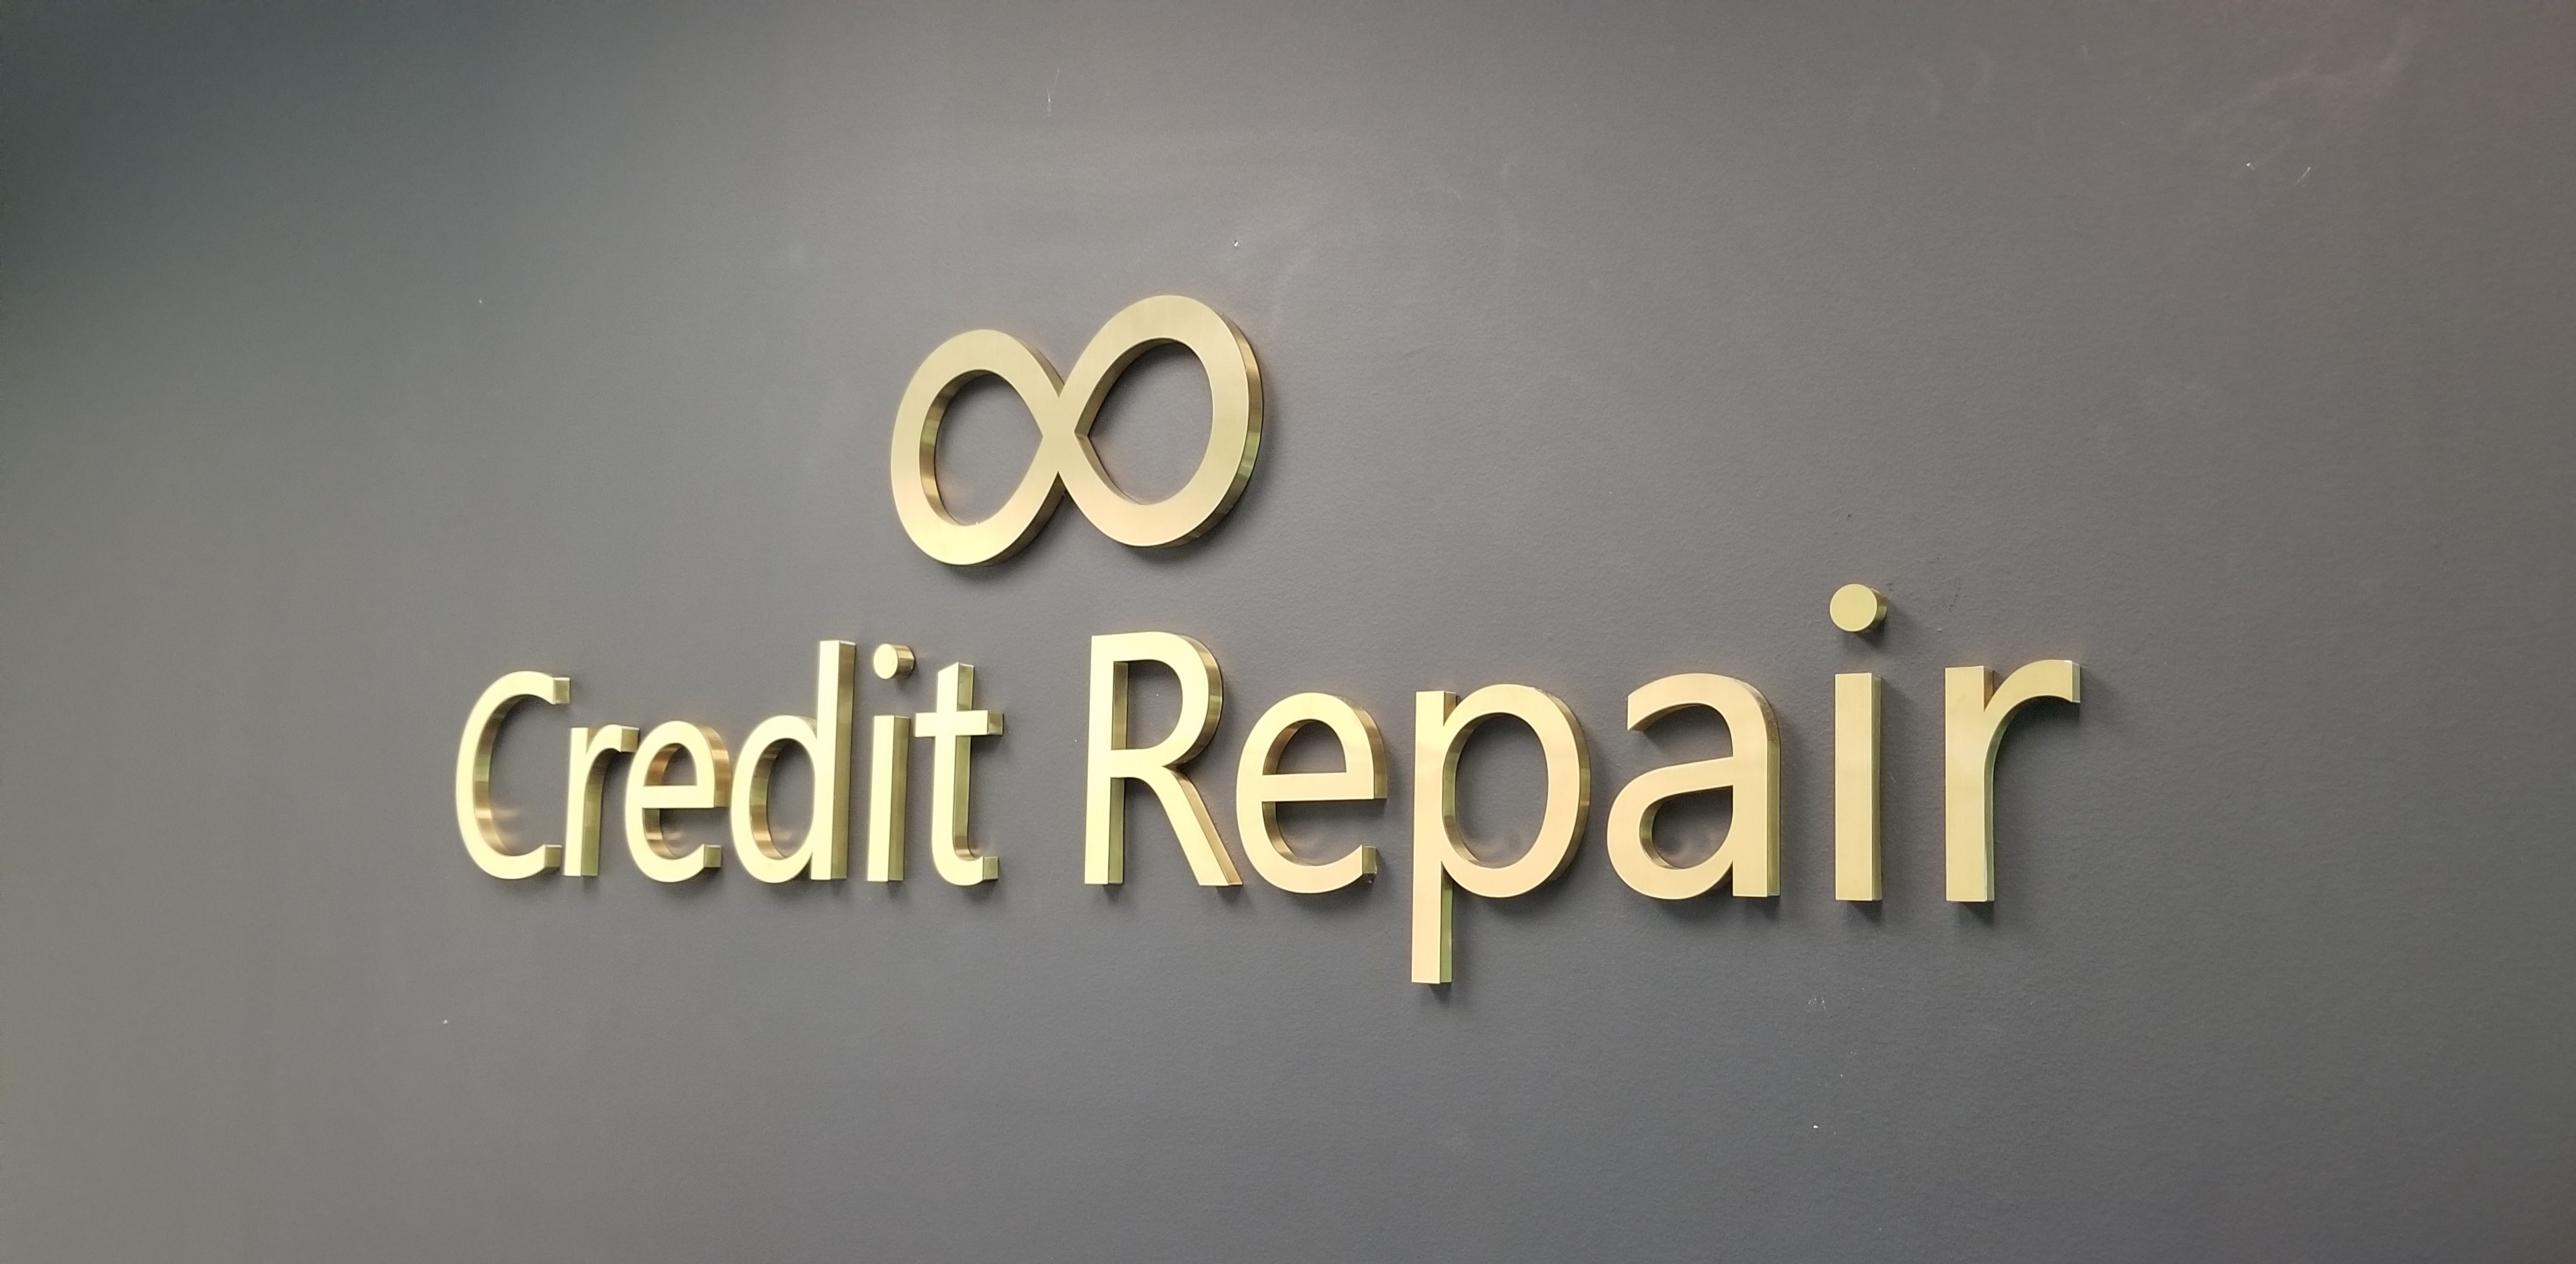 This is the metal office lobby sign we made for Unlimited Credit Repair in Woodland Hills.